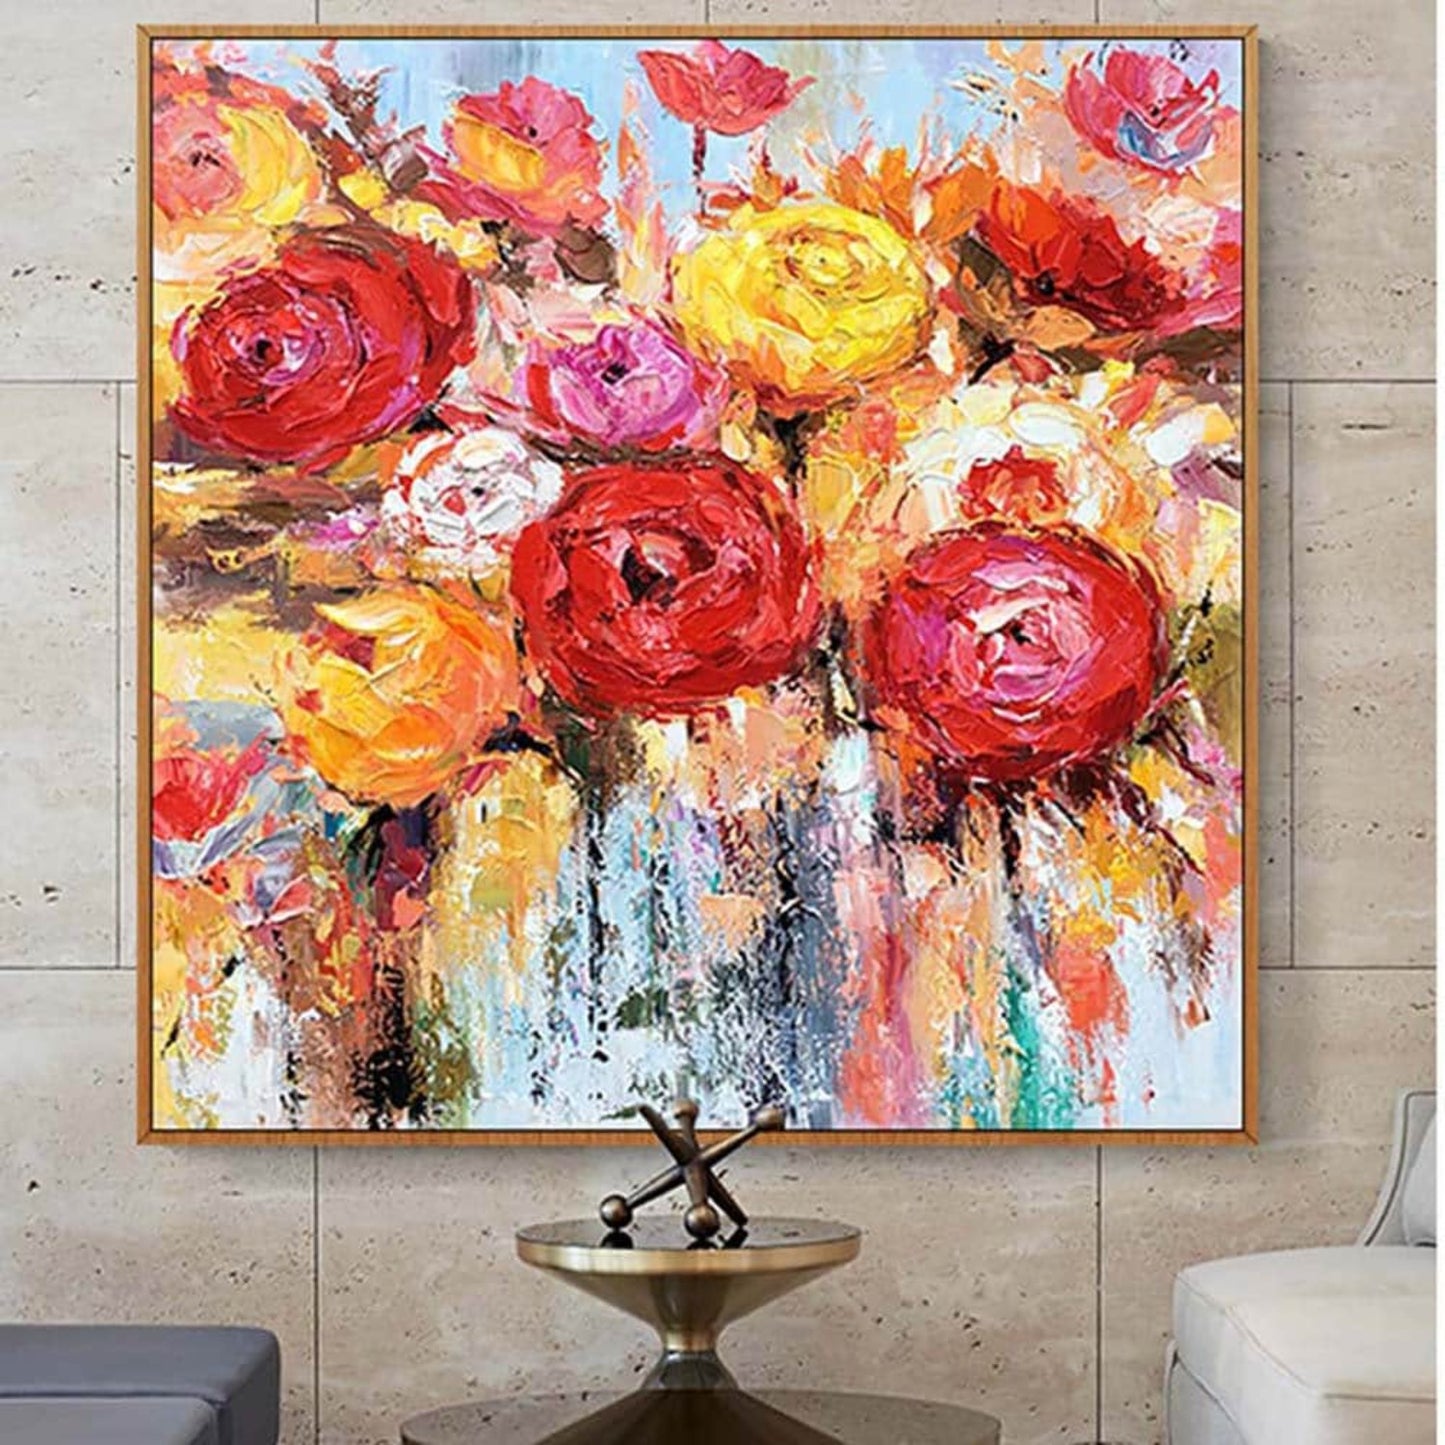 Colourful Blooming Roses Textured Floral Painting